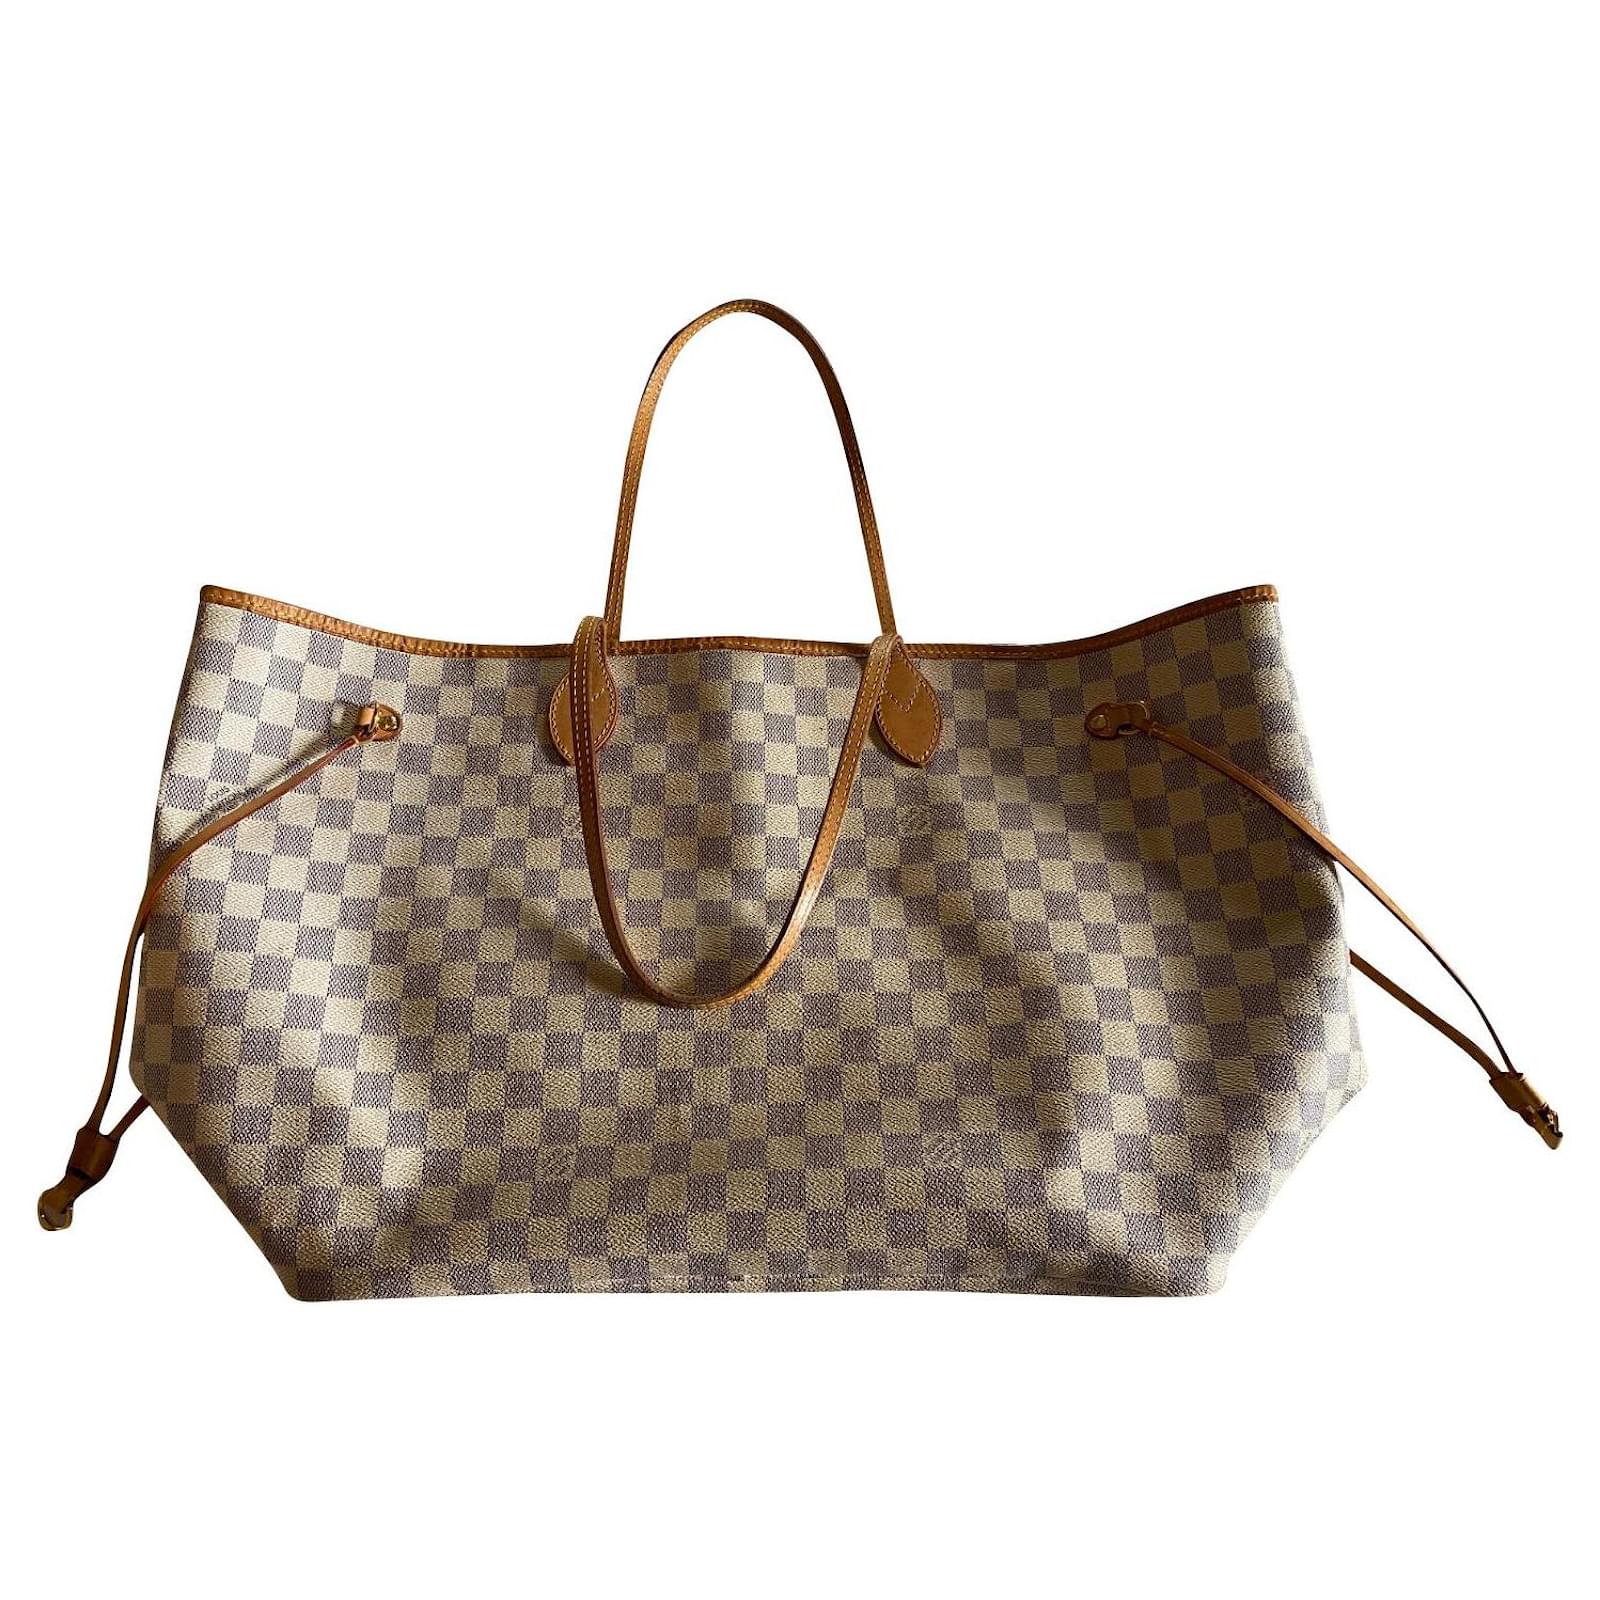 louis vuitton large tote neverfull